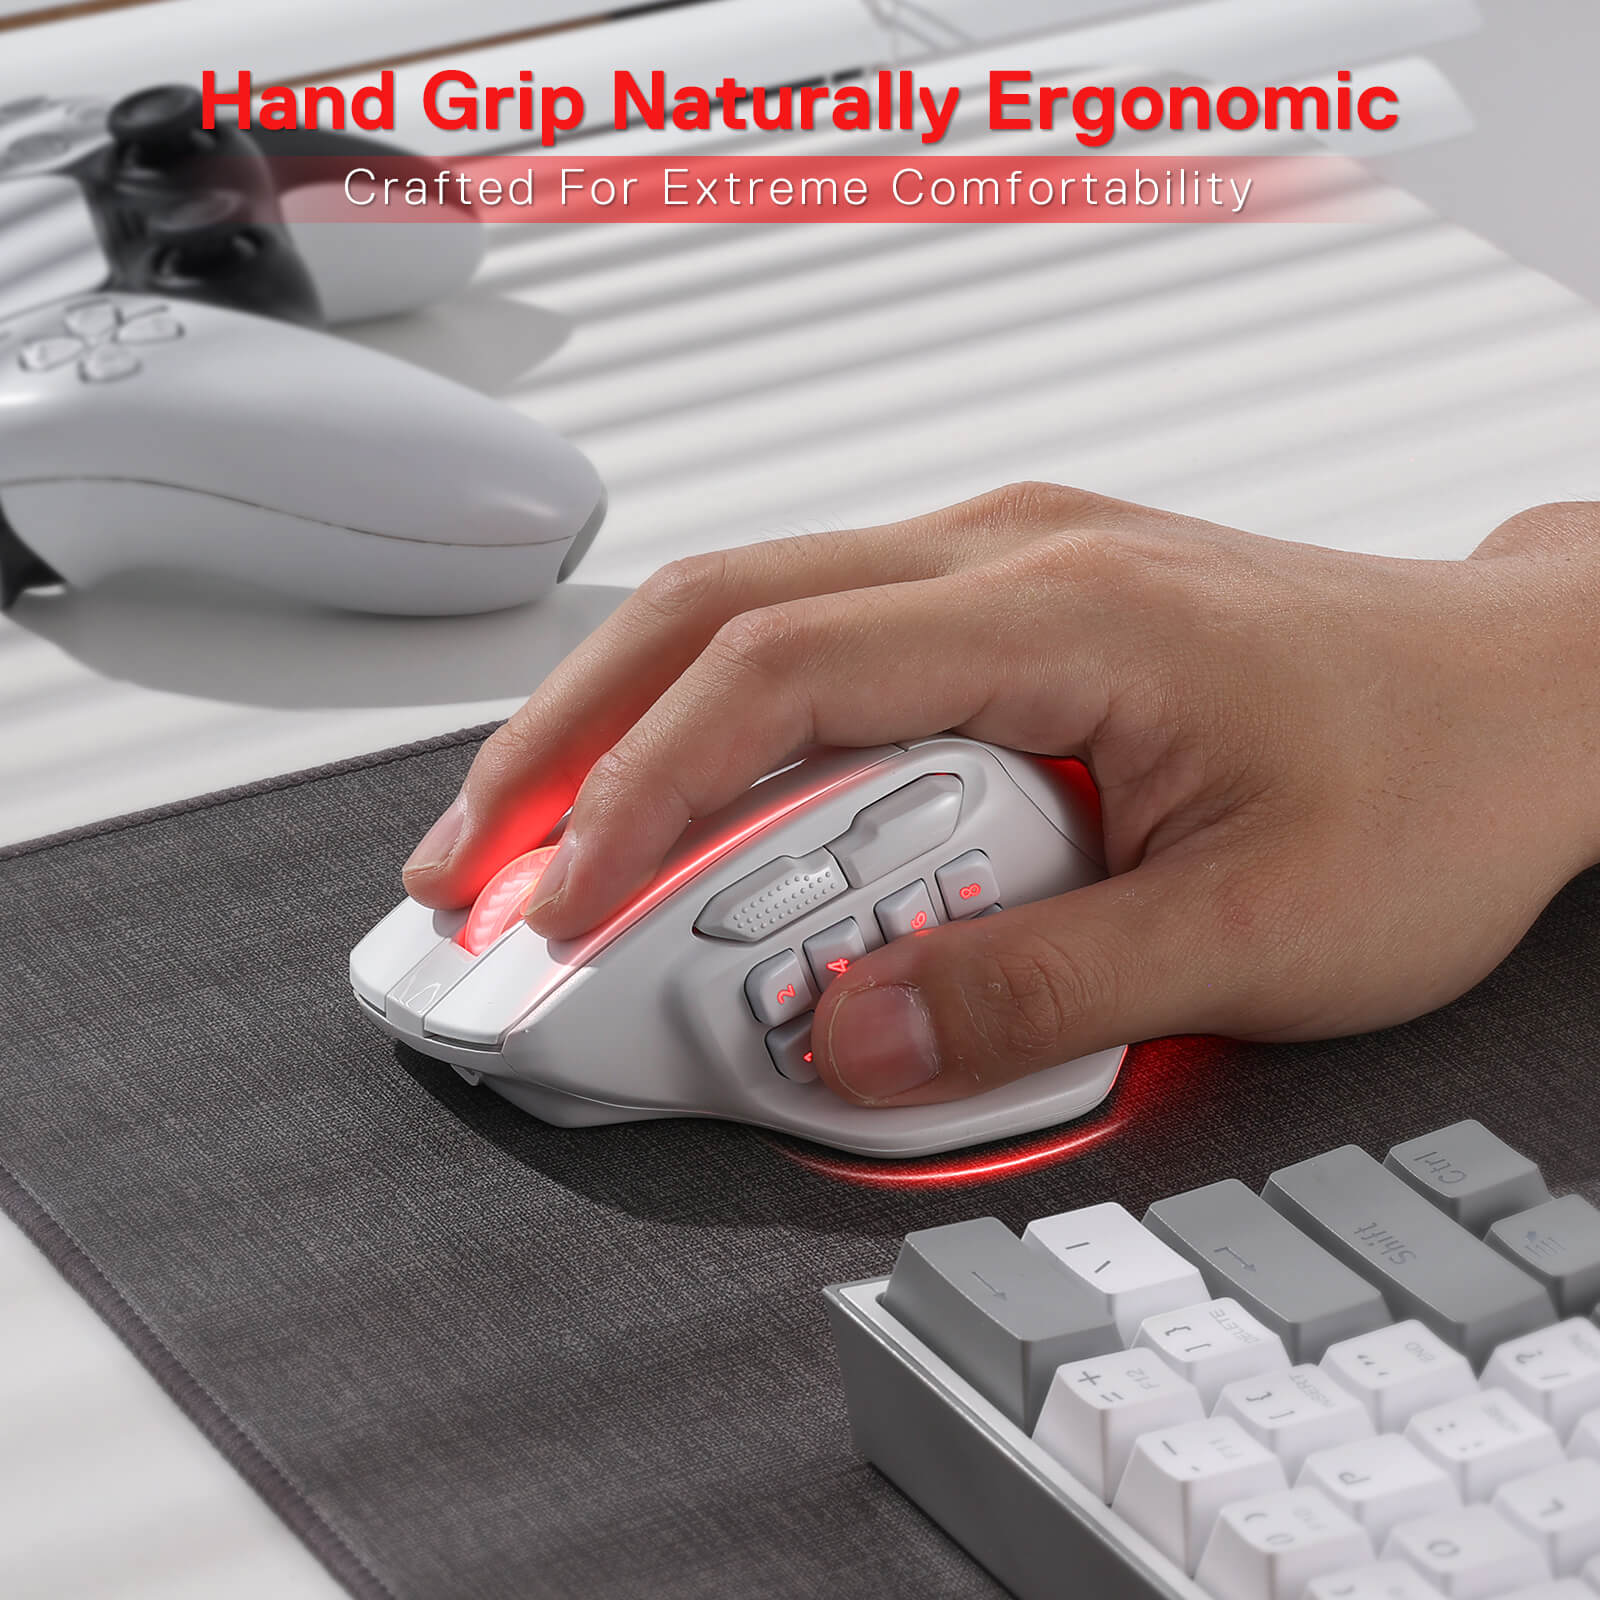 Say goodbye to wires: Freedom of wireless keyboard and mouse